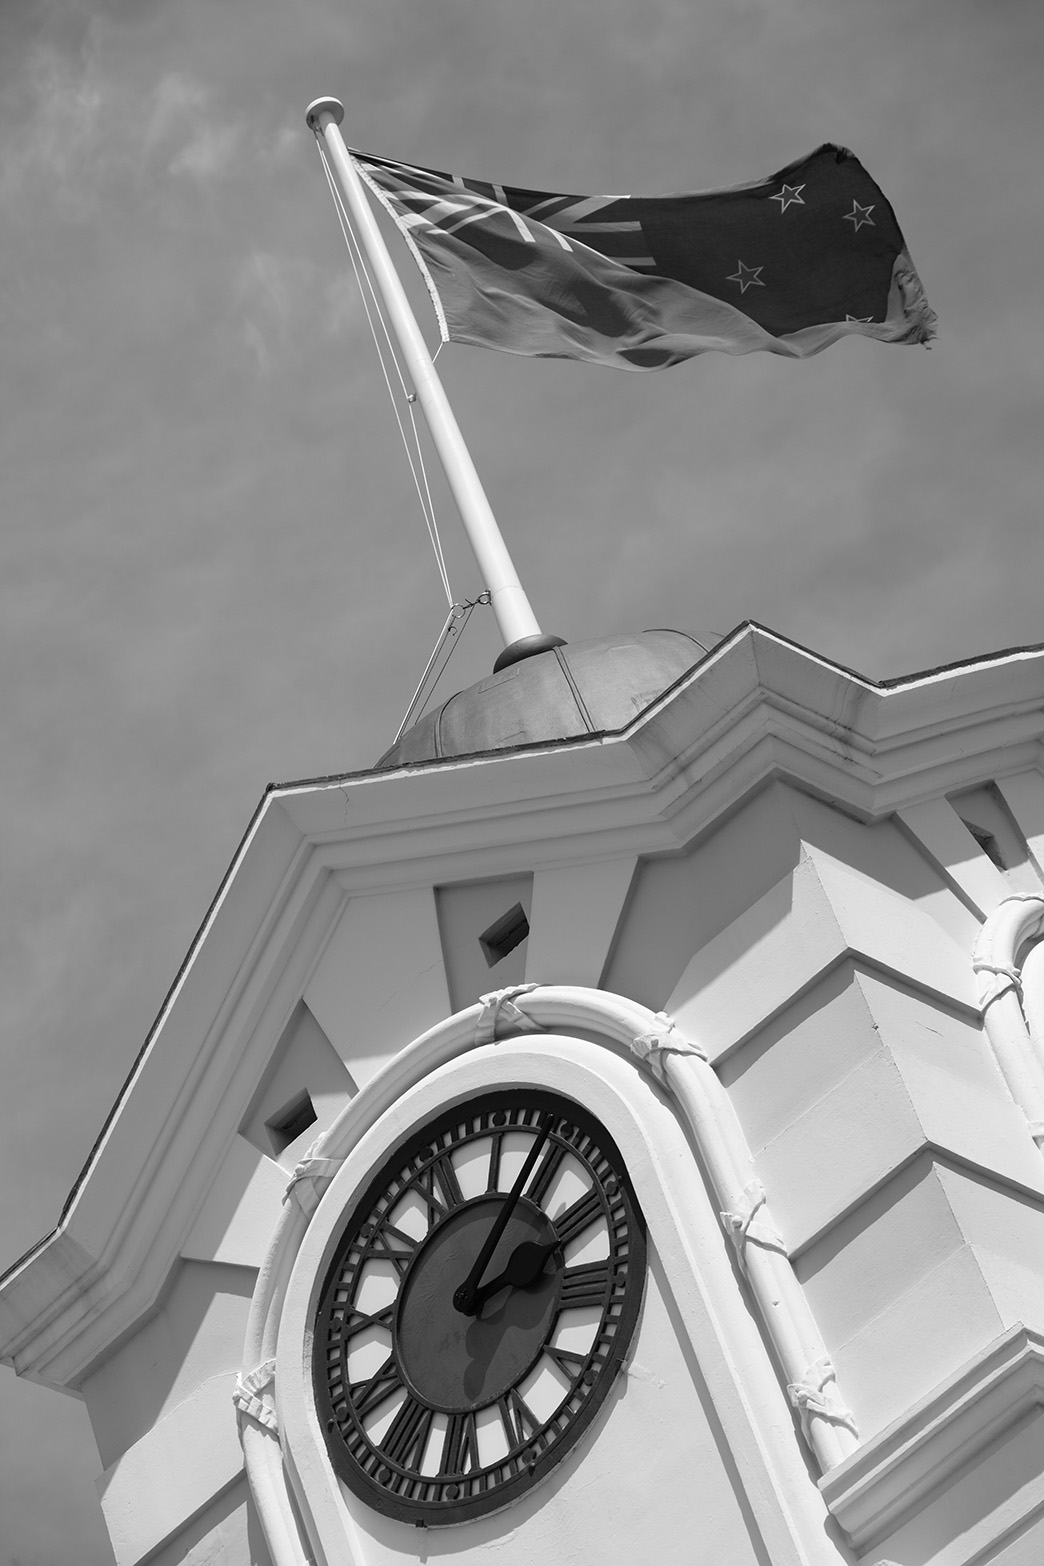 ponsonby clock tower with new zealand flag